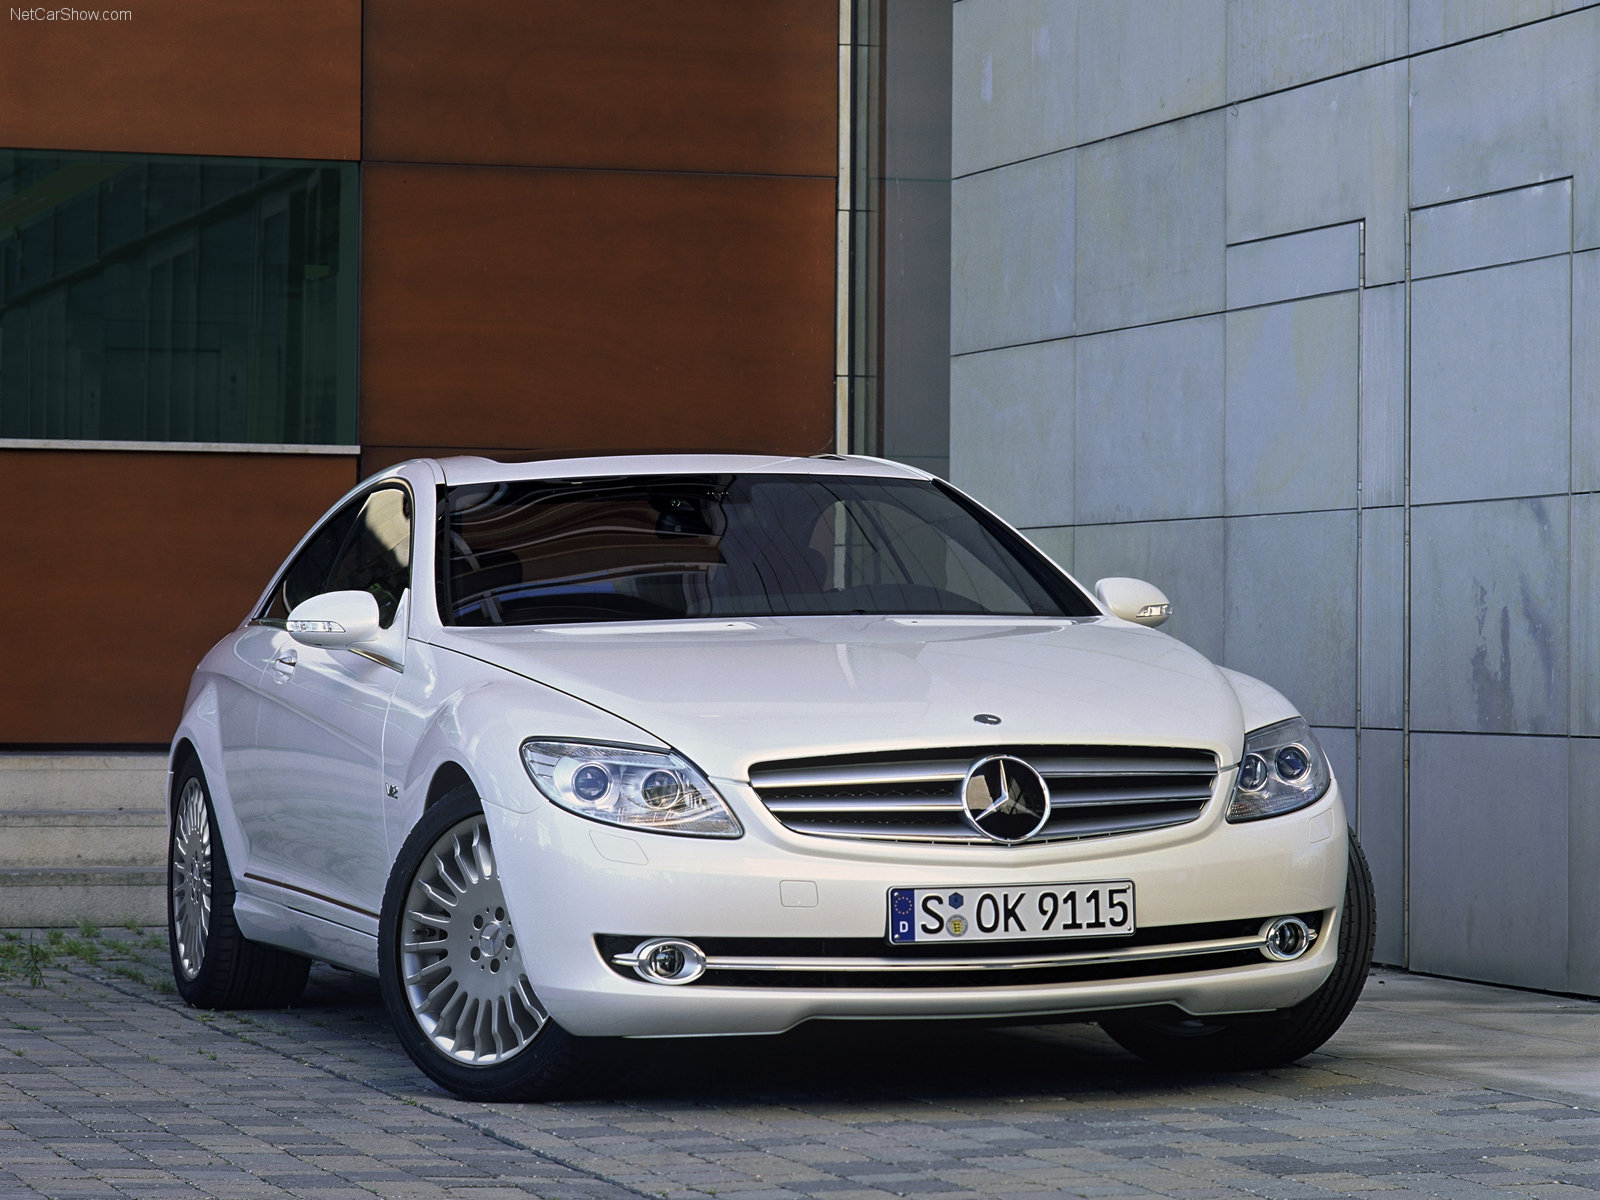 You can vote for this Mercedes-Benz CL-Class W216 photo